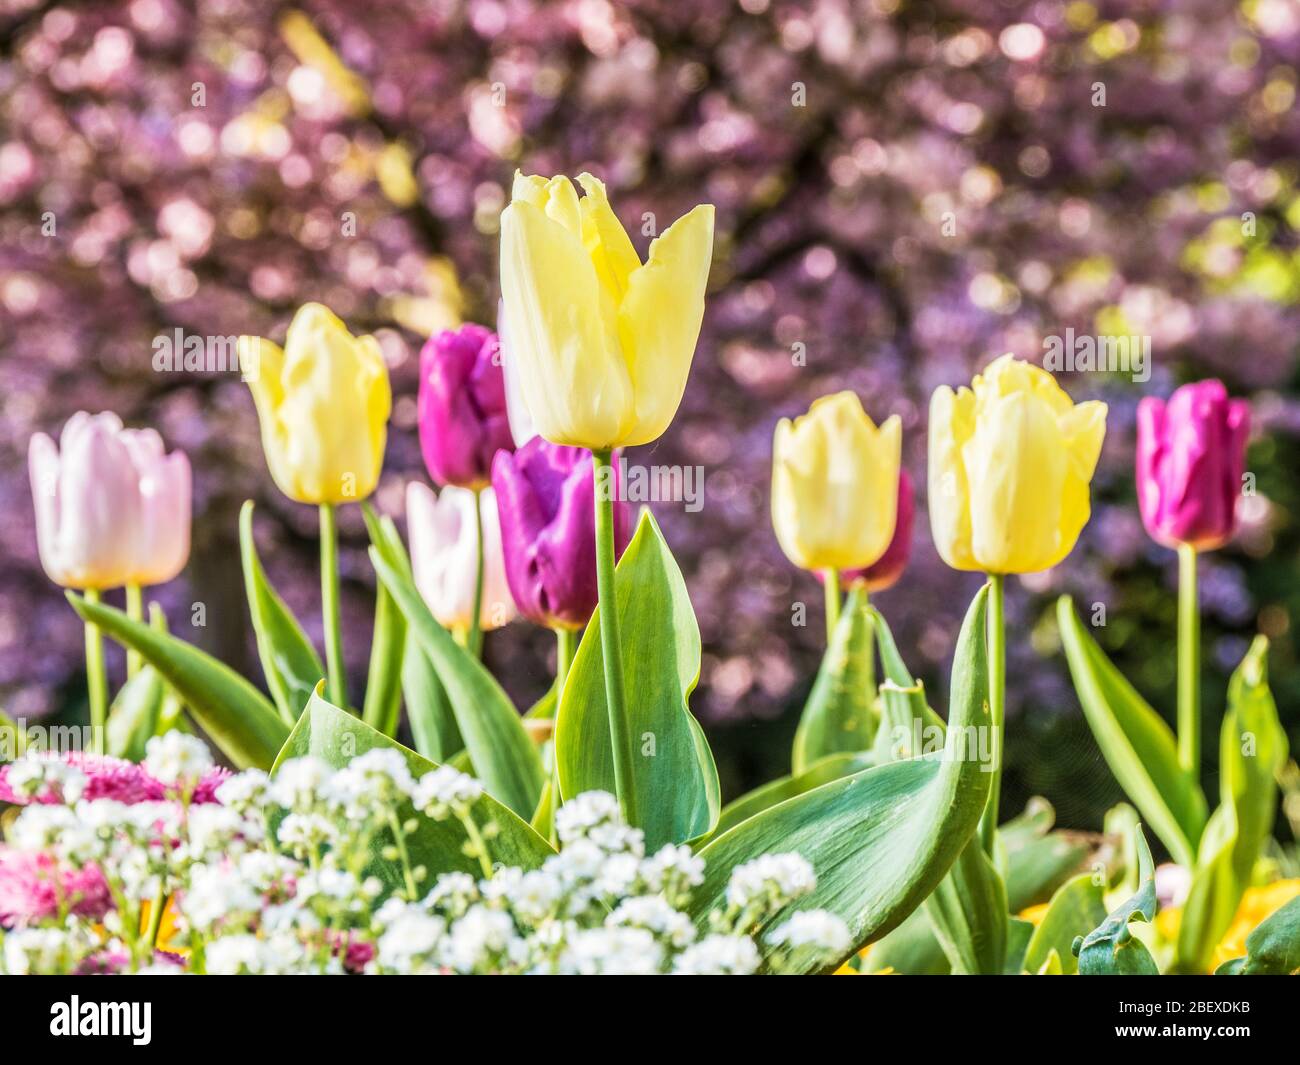 Yellow, pink and purple tulips in a bed of white alyssum against an out of focus background of pink cherry blossom. Stock Photo